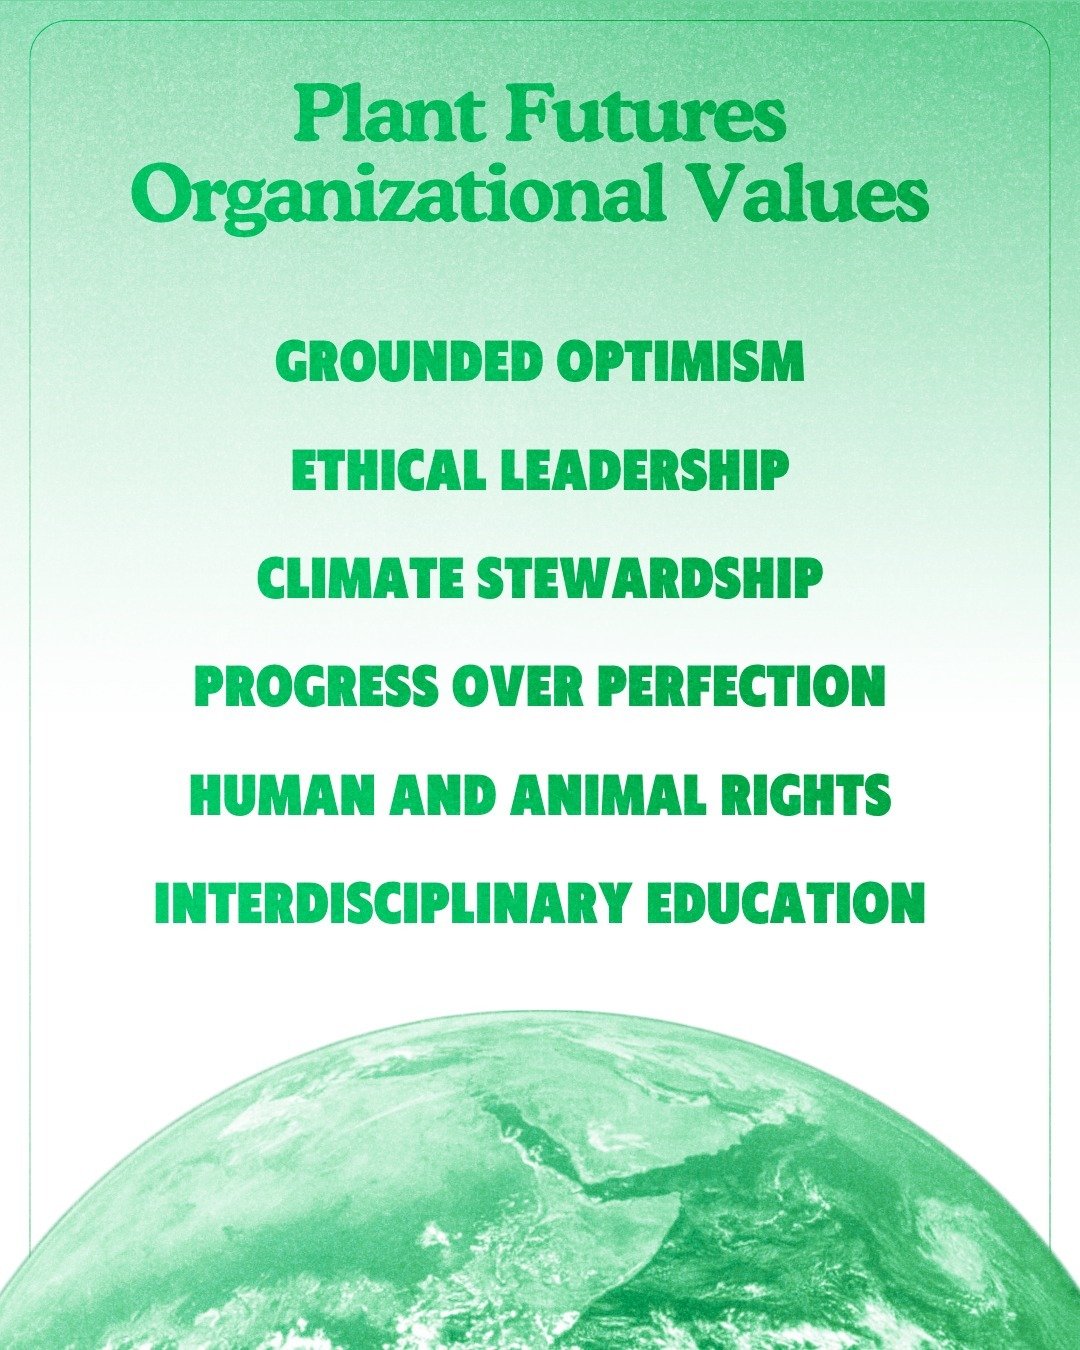 Plant Futures stands for values that advocate for human and animal rights, striving for equality and ethical treatment:

🌱 Grounded Optimism
🎓 Interdisciplinary Education
🌍 Climate Stewardship
👥 Ethical Leadership
💚 Human &amp; Animal Rights
📈 